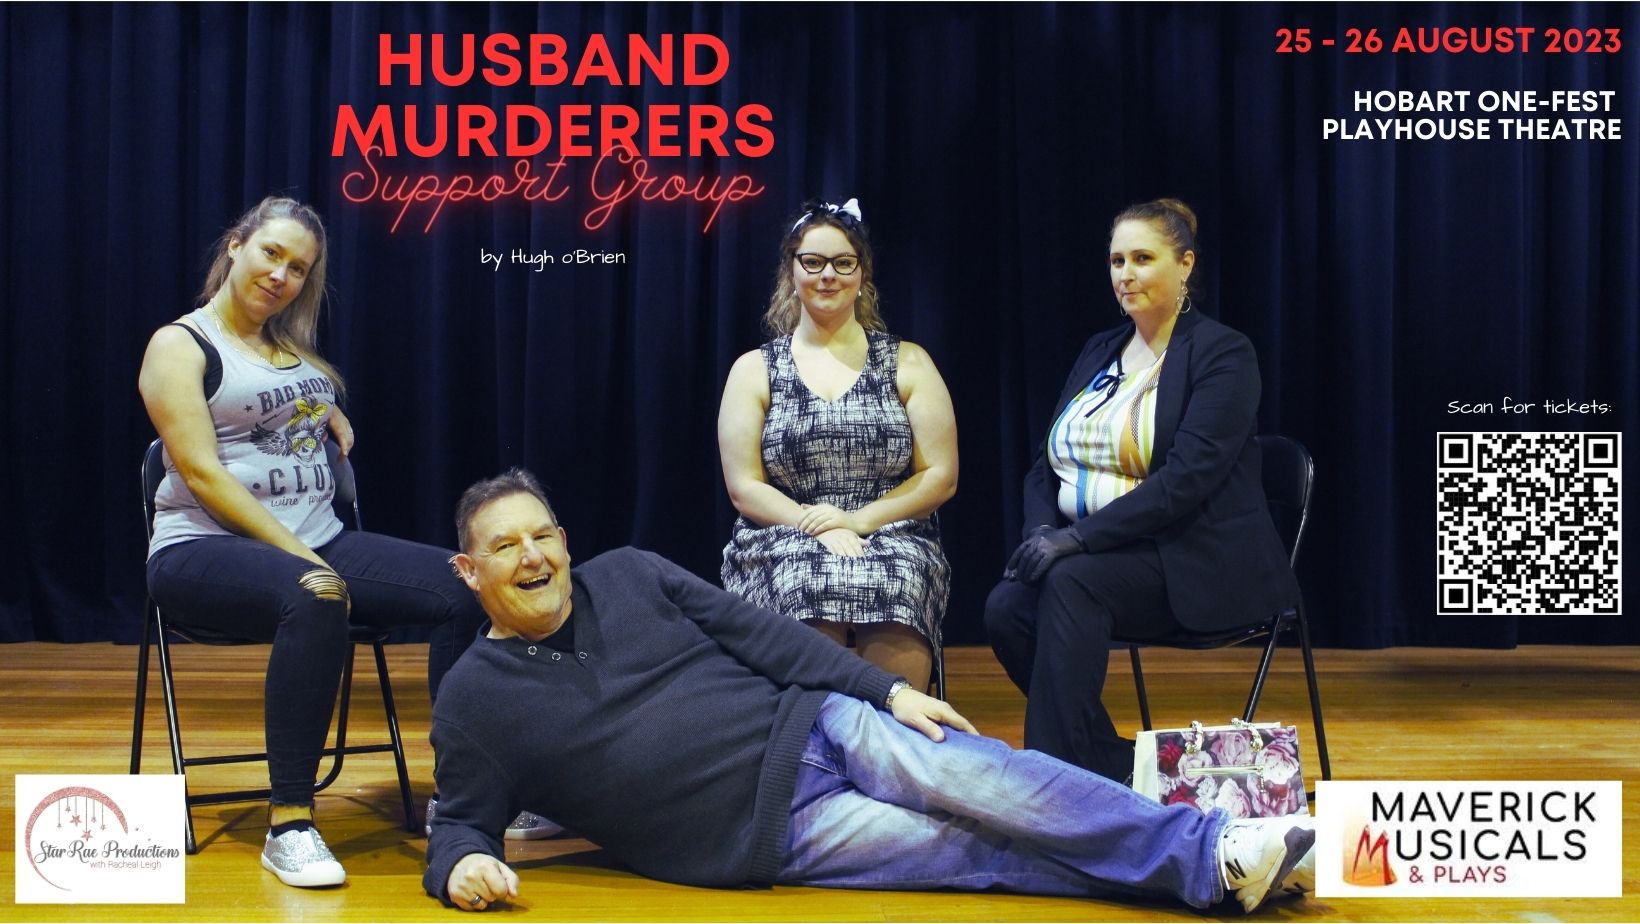 Husband Murderers Support Group